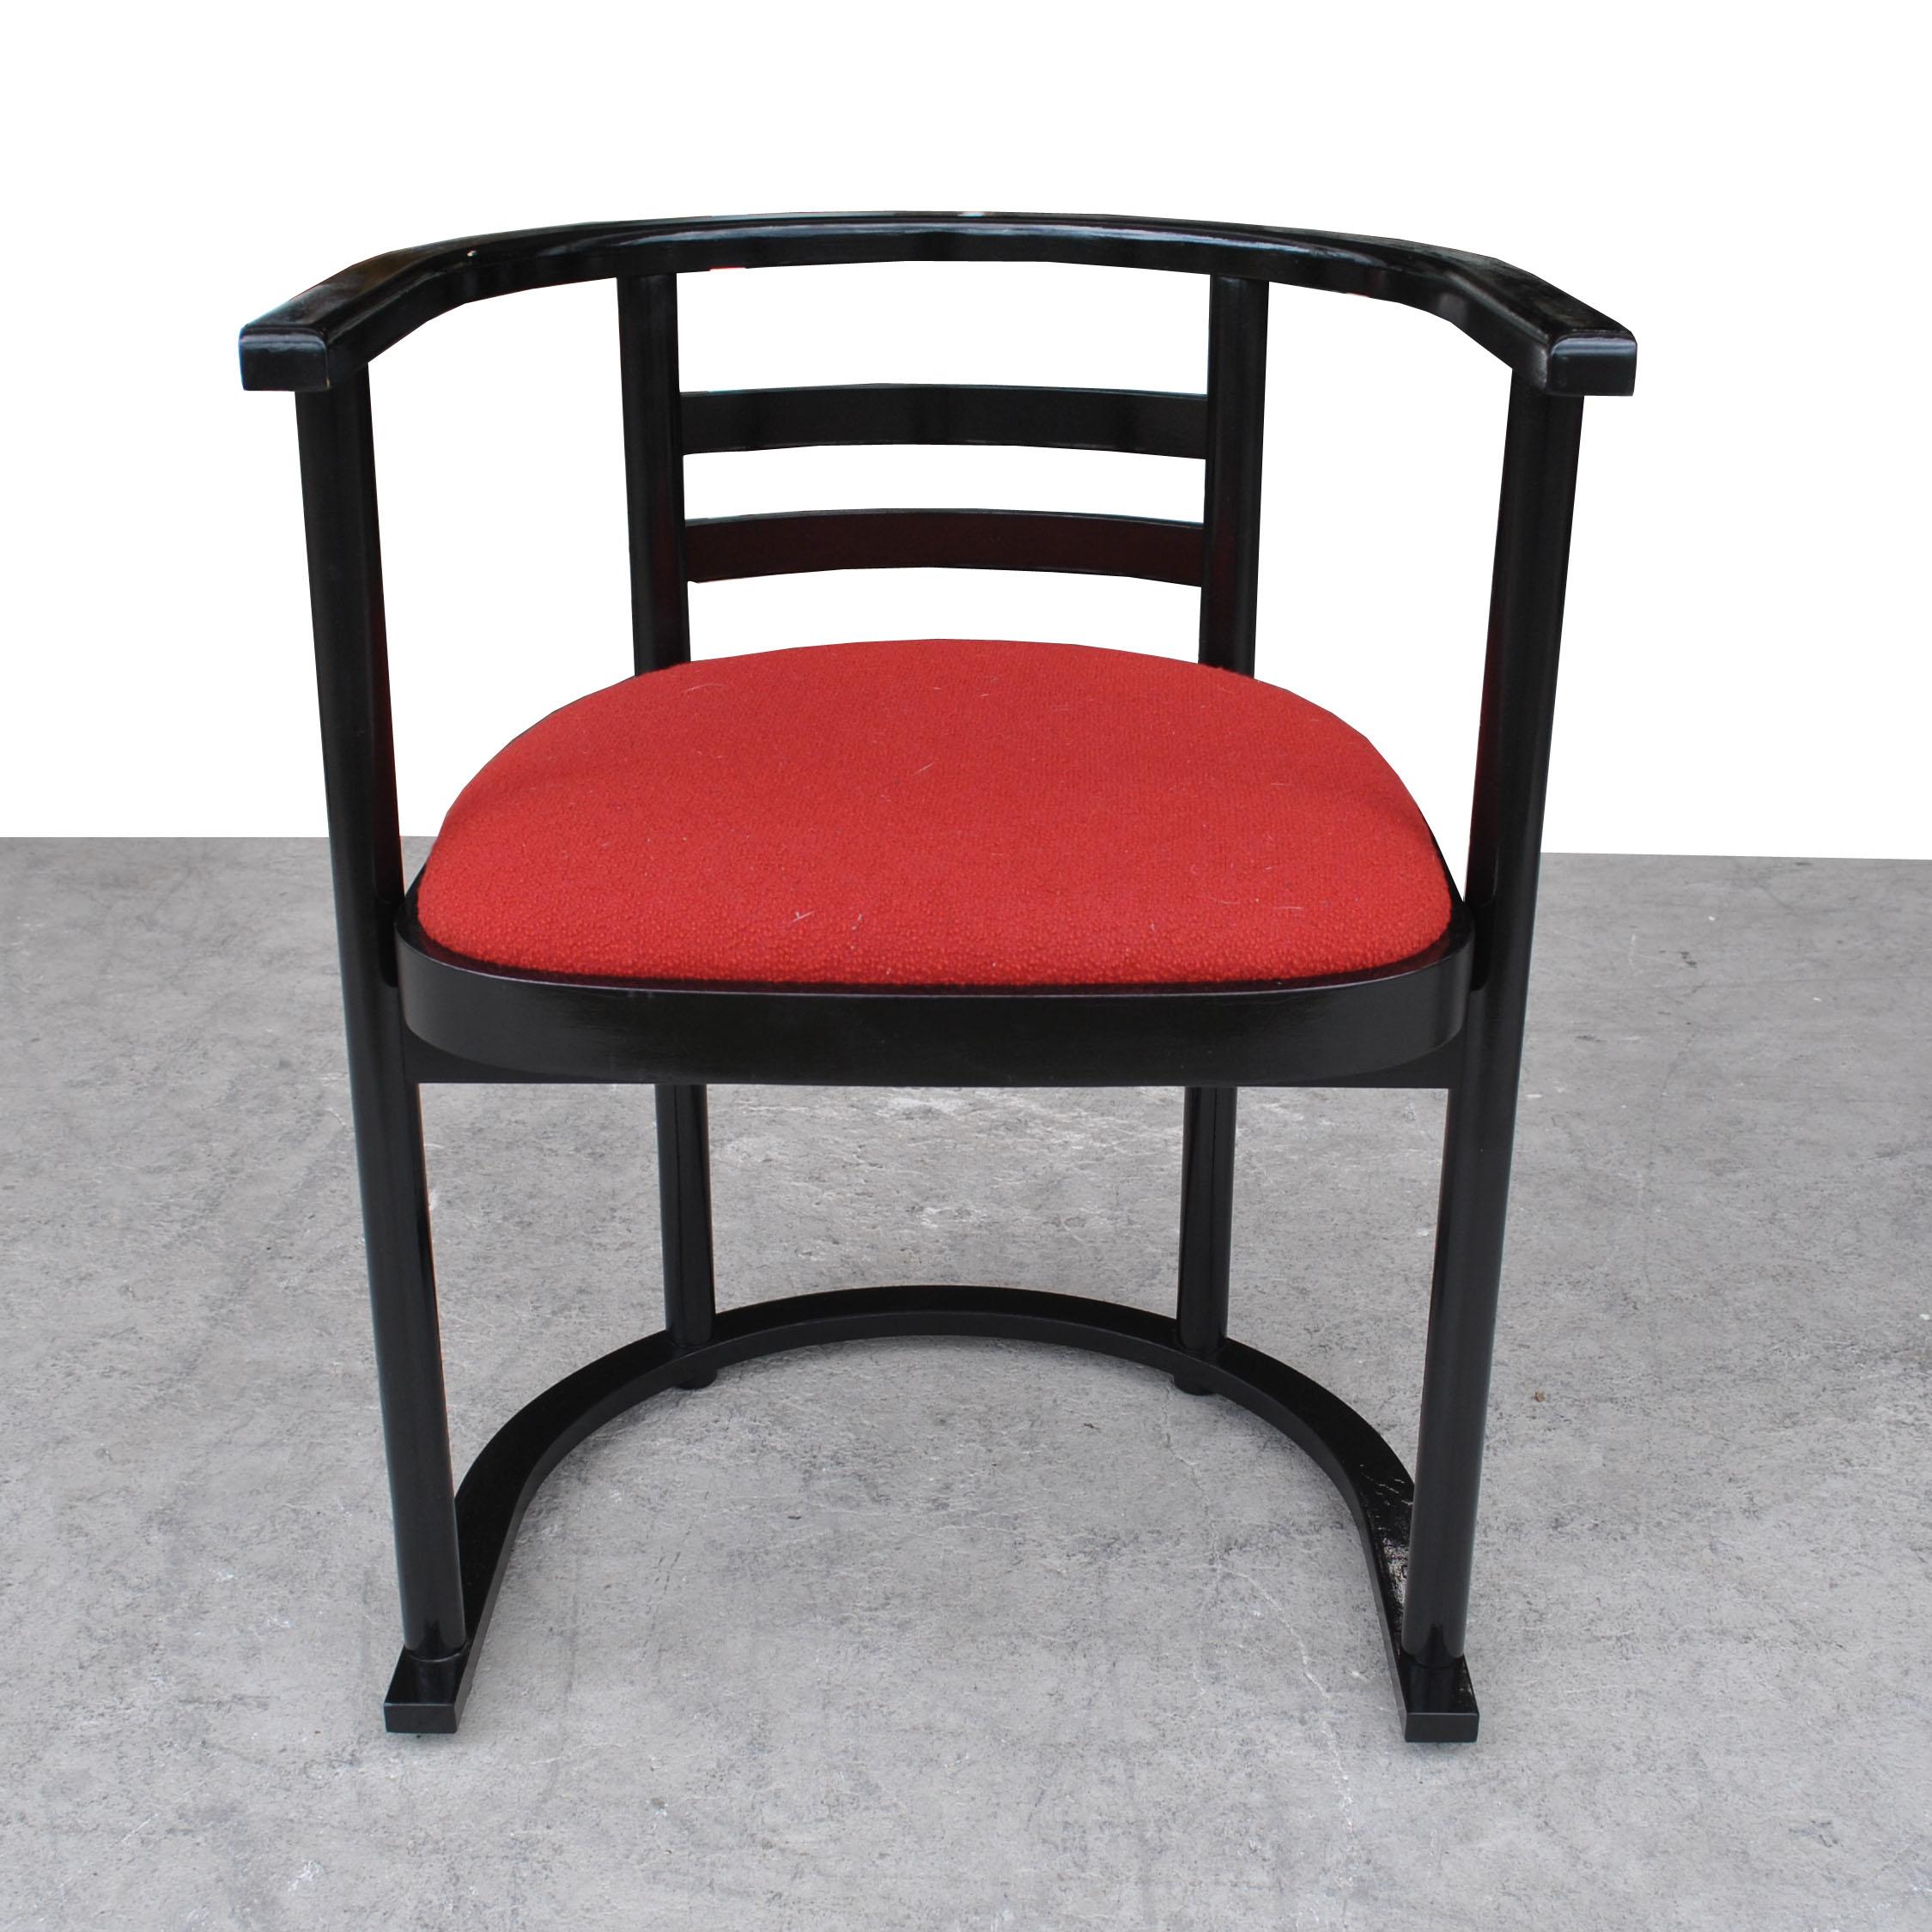 Josef Hoffmann (Austria, 1870–1956)
The Austrian architect Josef Hoffmann was a central figure in the evolution of modern design, and a leader in an aesthetic movement born in Europe in the late 19th century that rejected florid, extravagant